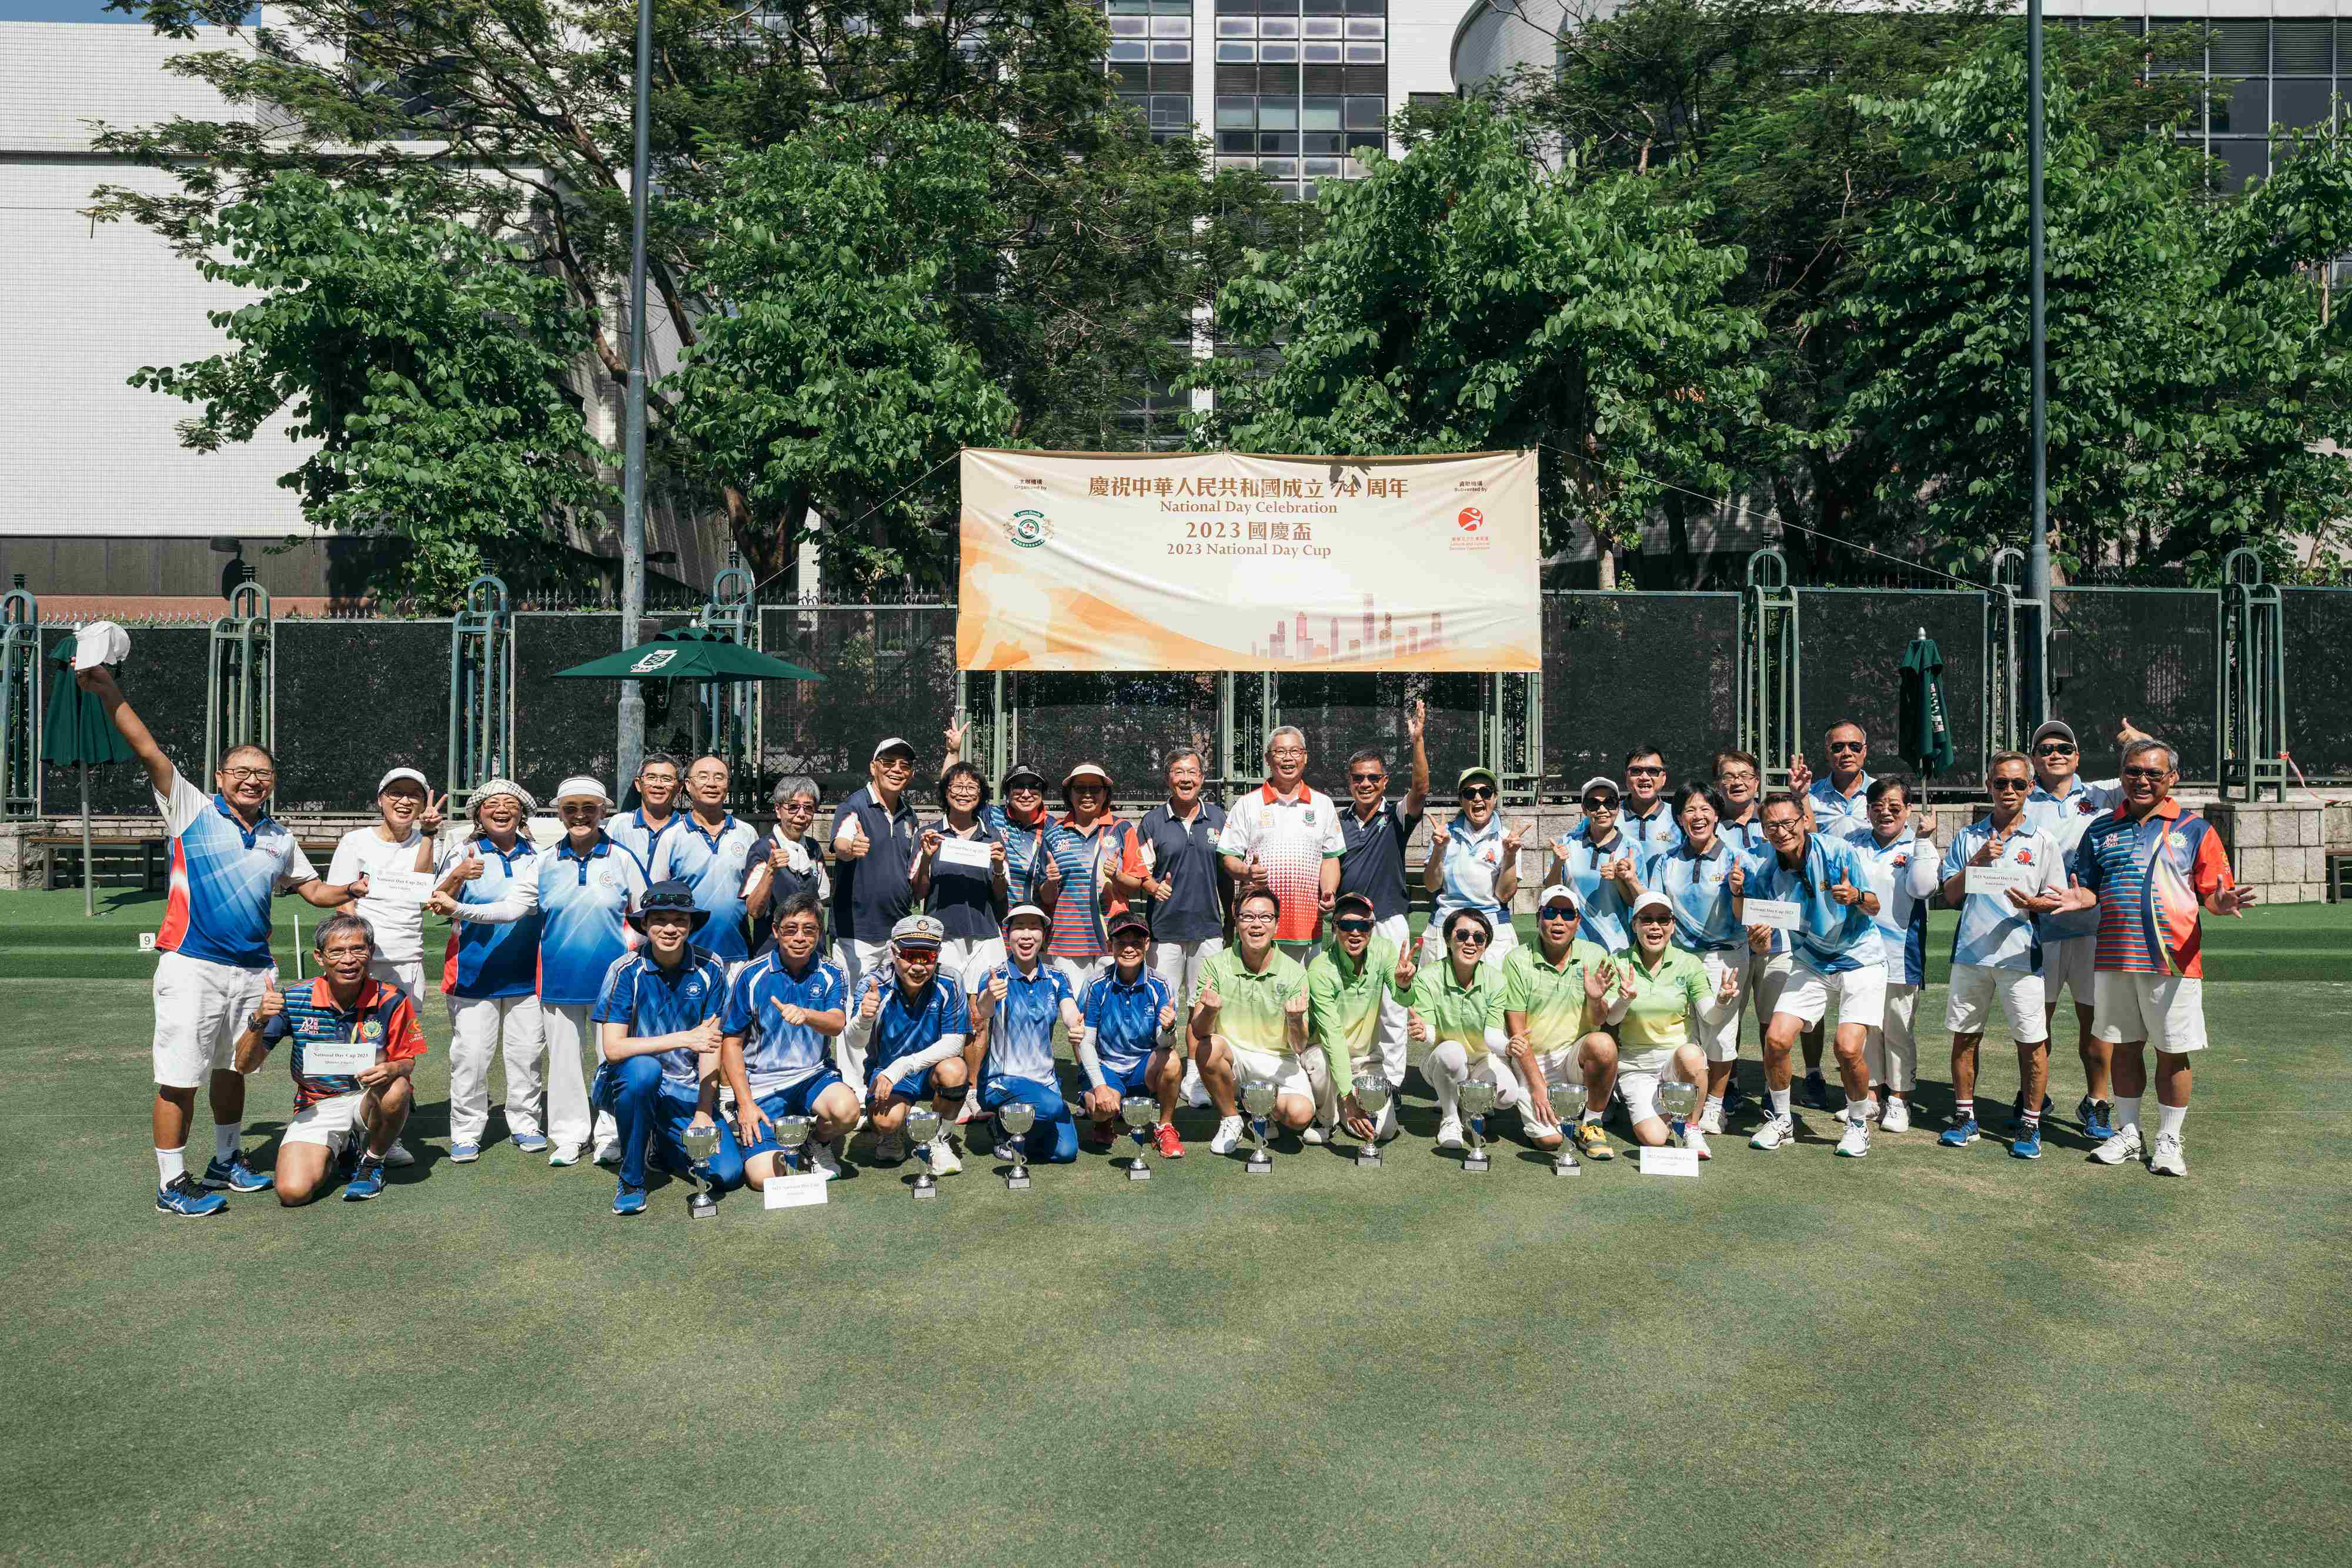 Photo link – 2023 National Day Cup (Day 2 at KCC) (Issued on 2/10/23)